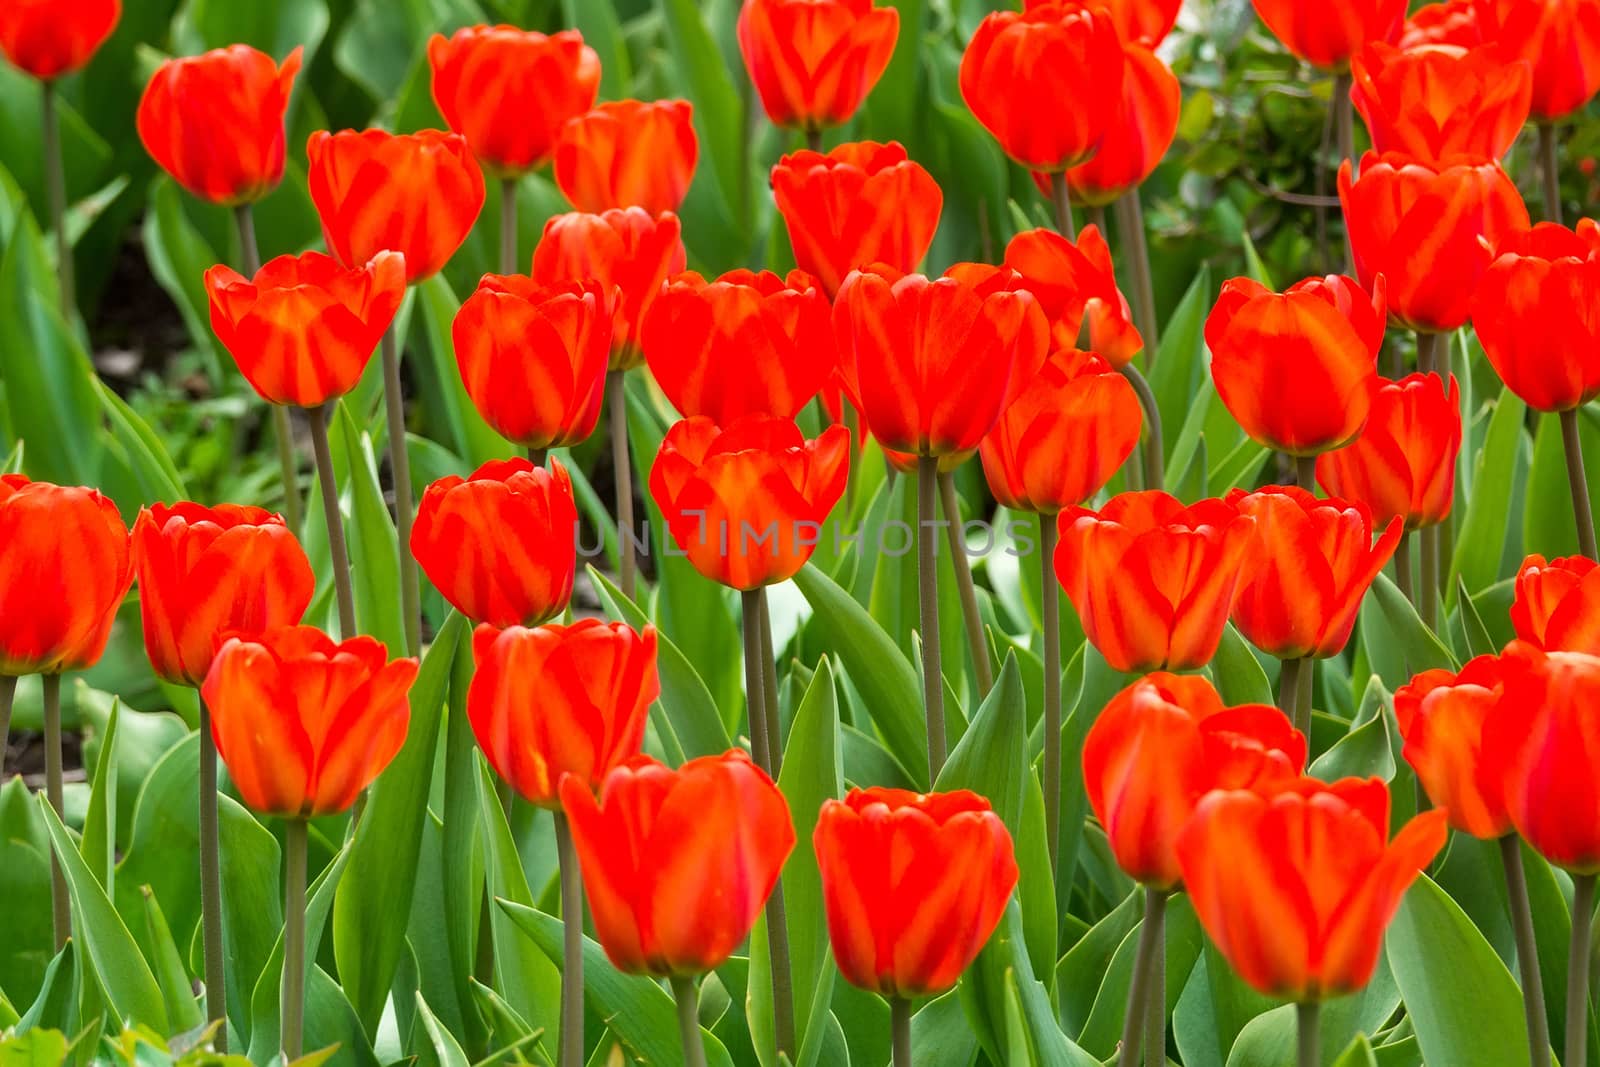 The photo shows flowers of red tulips